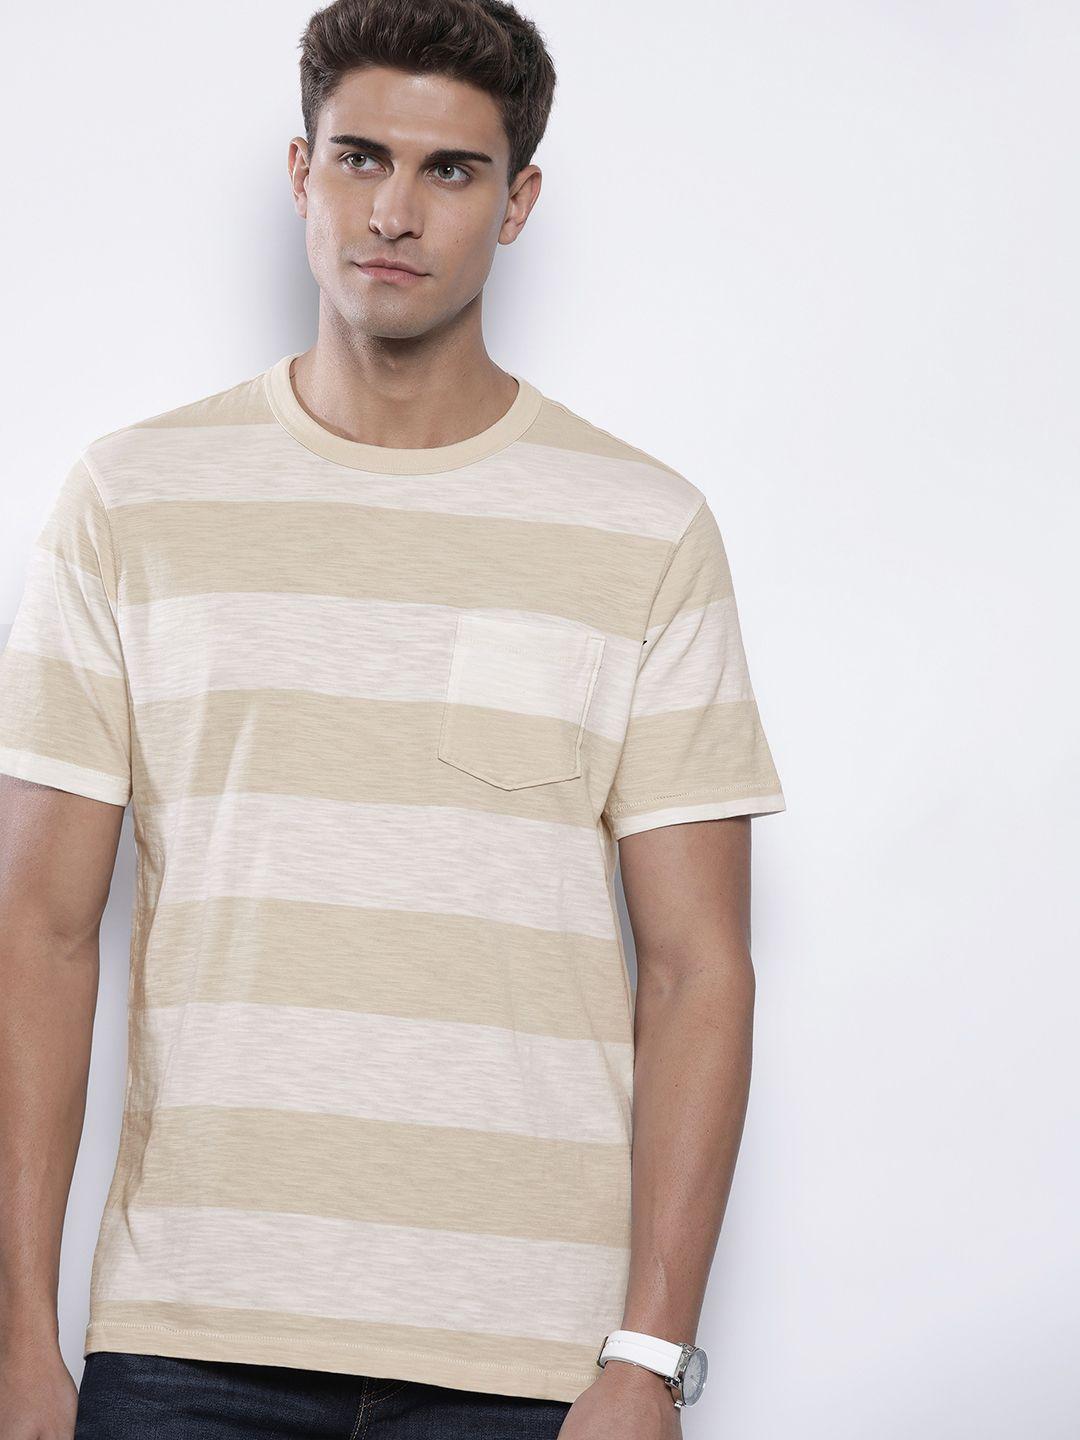 american eagle outfitters men beige & off white striped pure cotton t-shirt